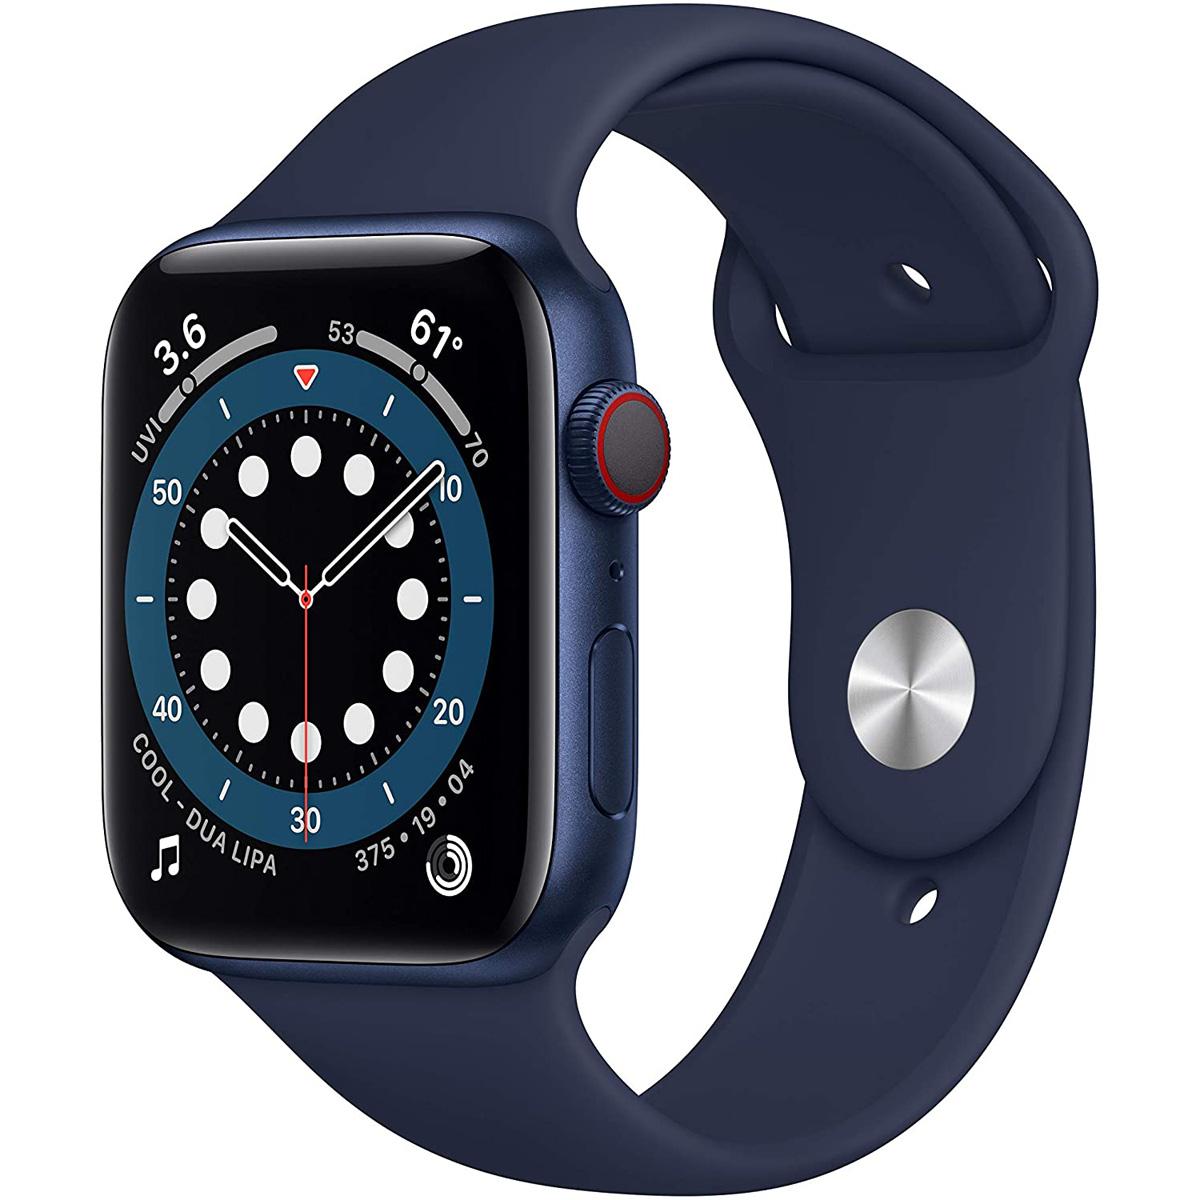 Apple Watch Series 6 Cellular 44mm Smartwatch for $459.98 Shipped